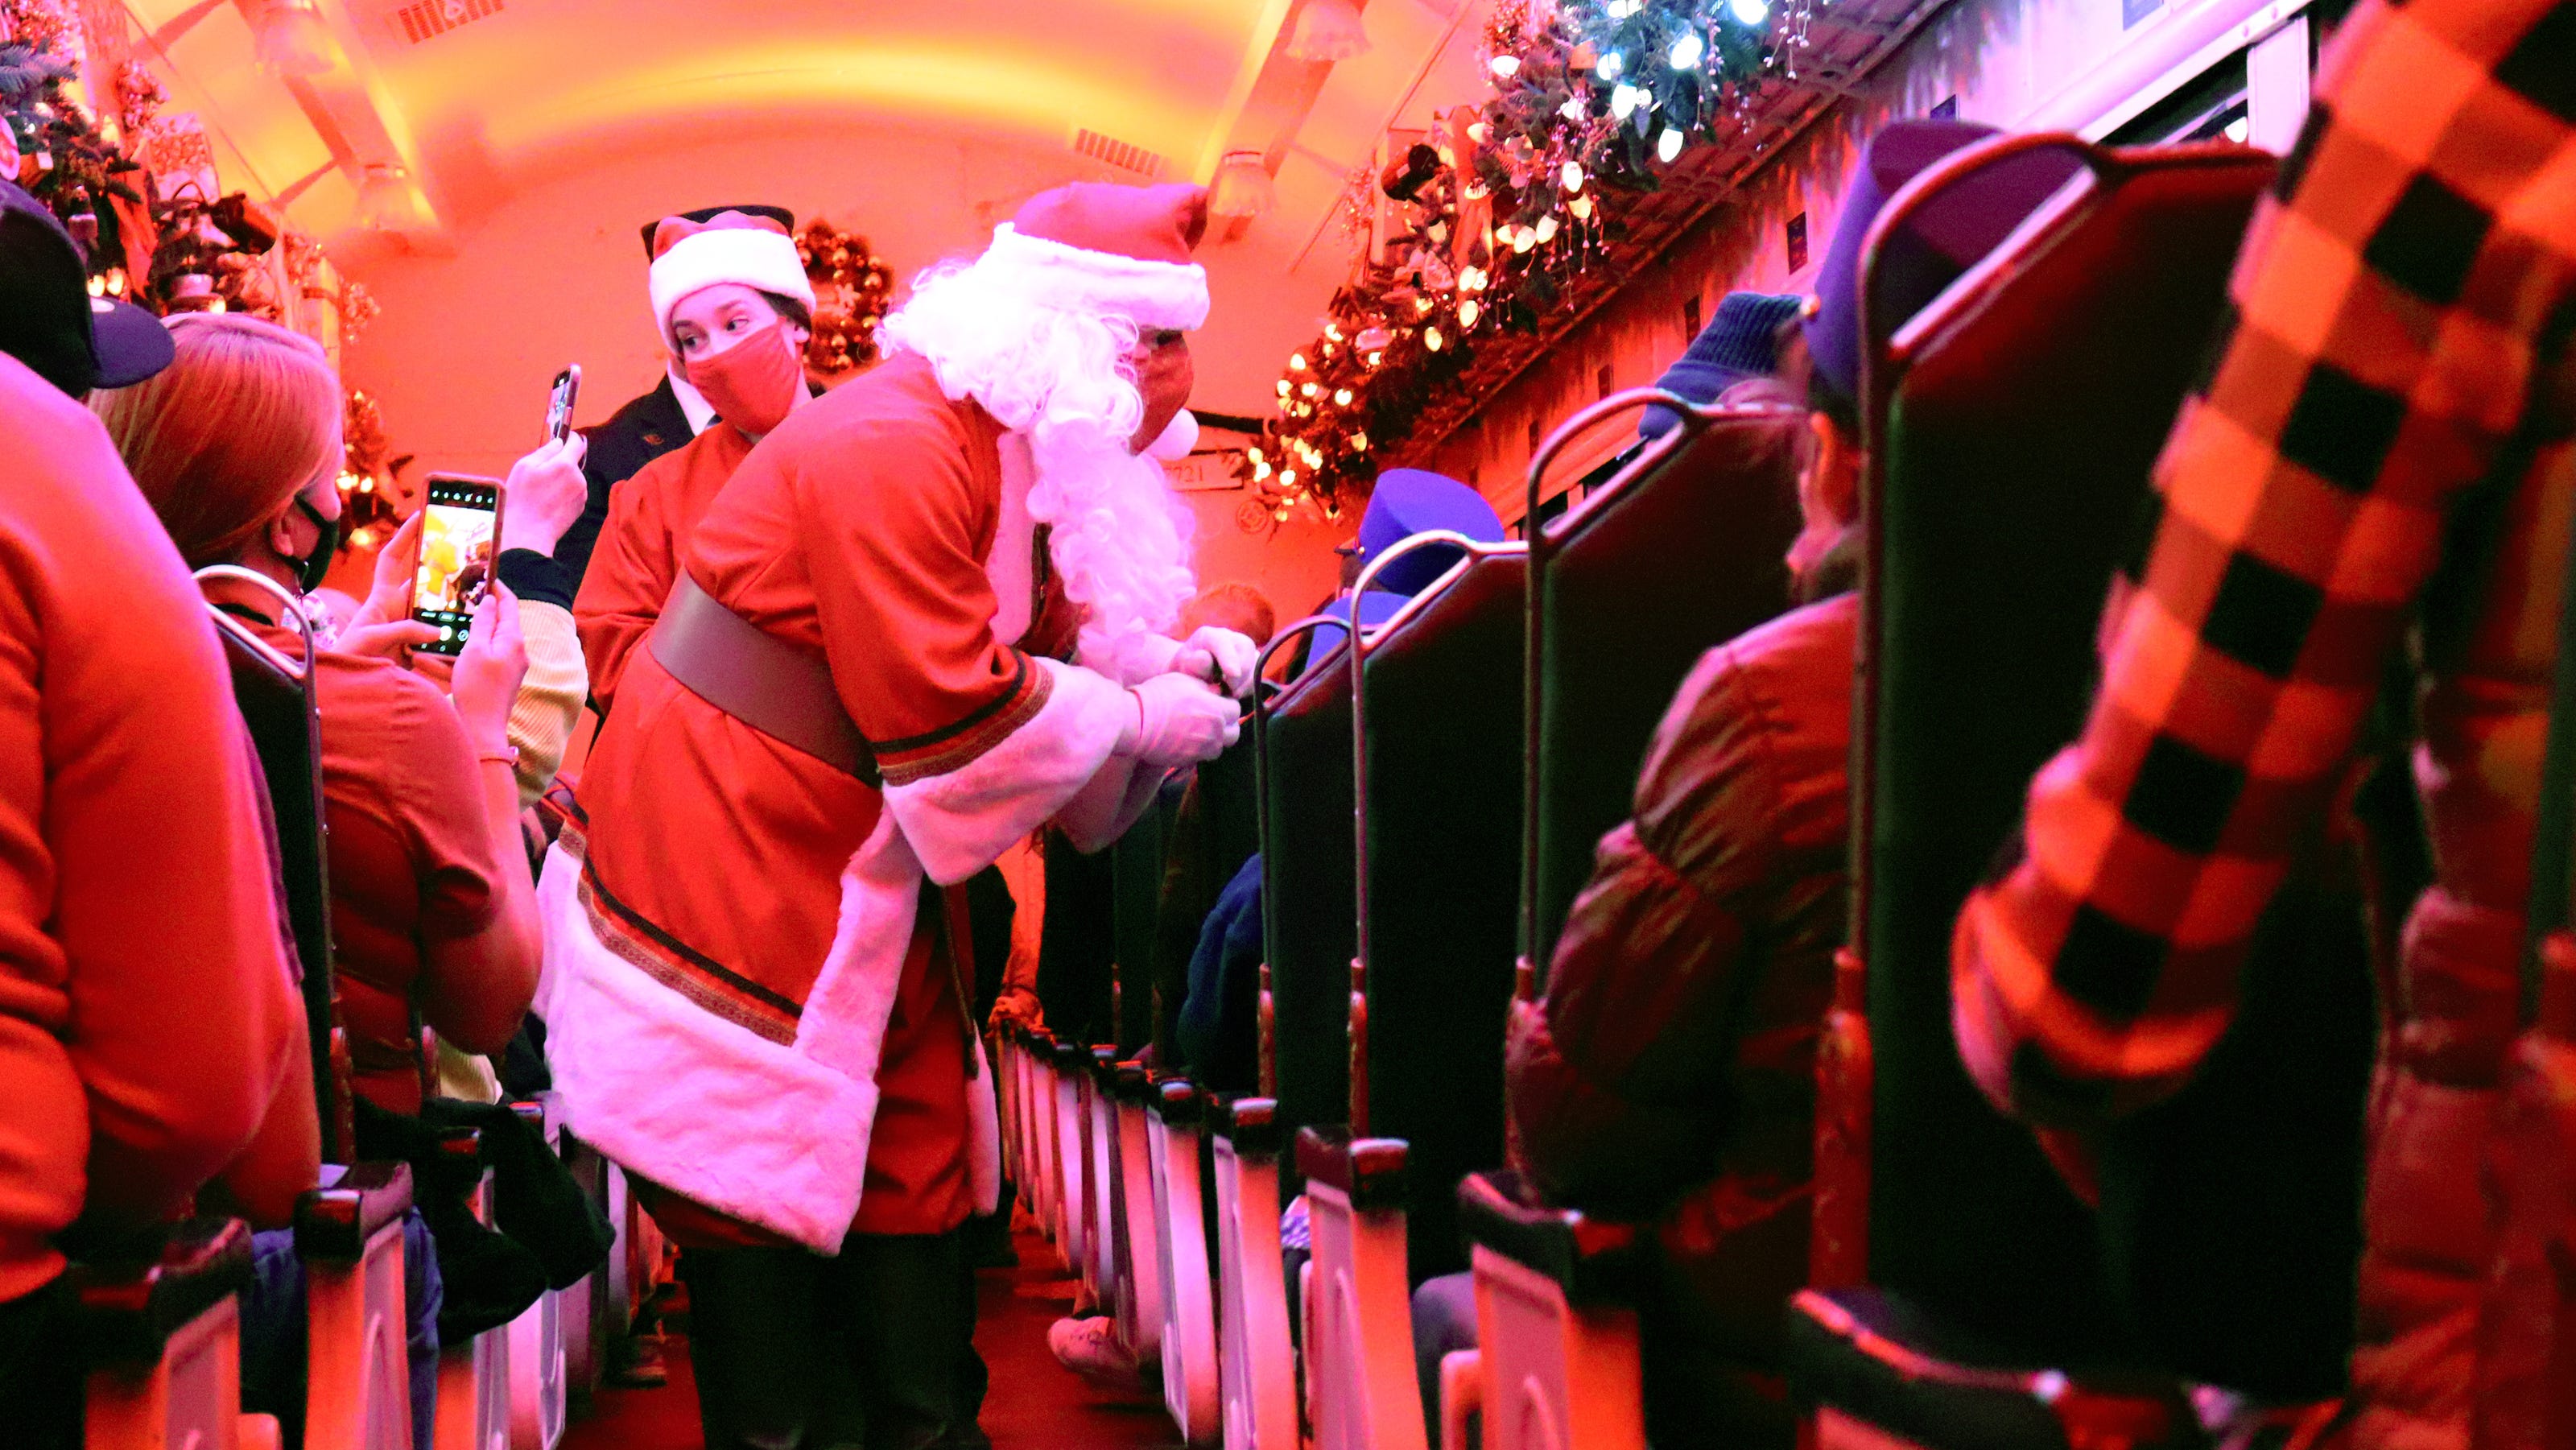 'Polar Express' Train Ride back in OKC after COVID19 derailed it